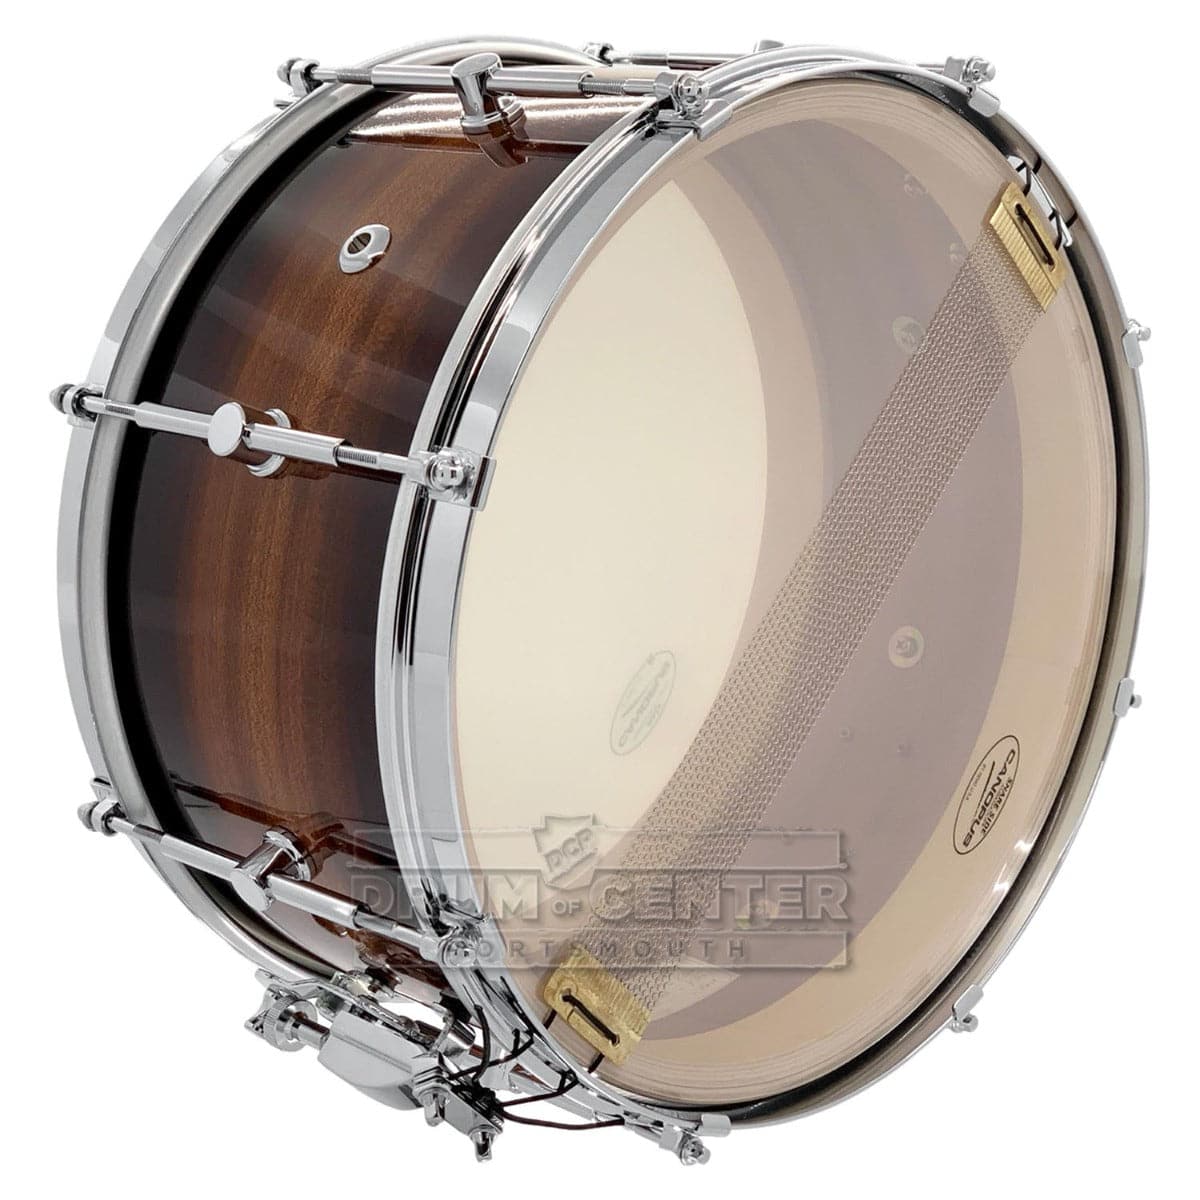 Canopus Mahogany Snare Drum 14x7 Brown Burst Lacquer w/Single Flanged Hoops